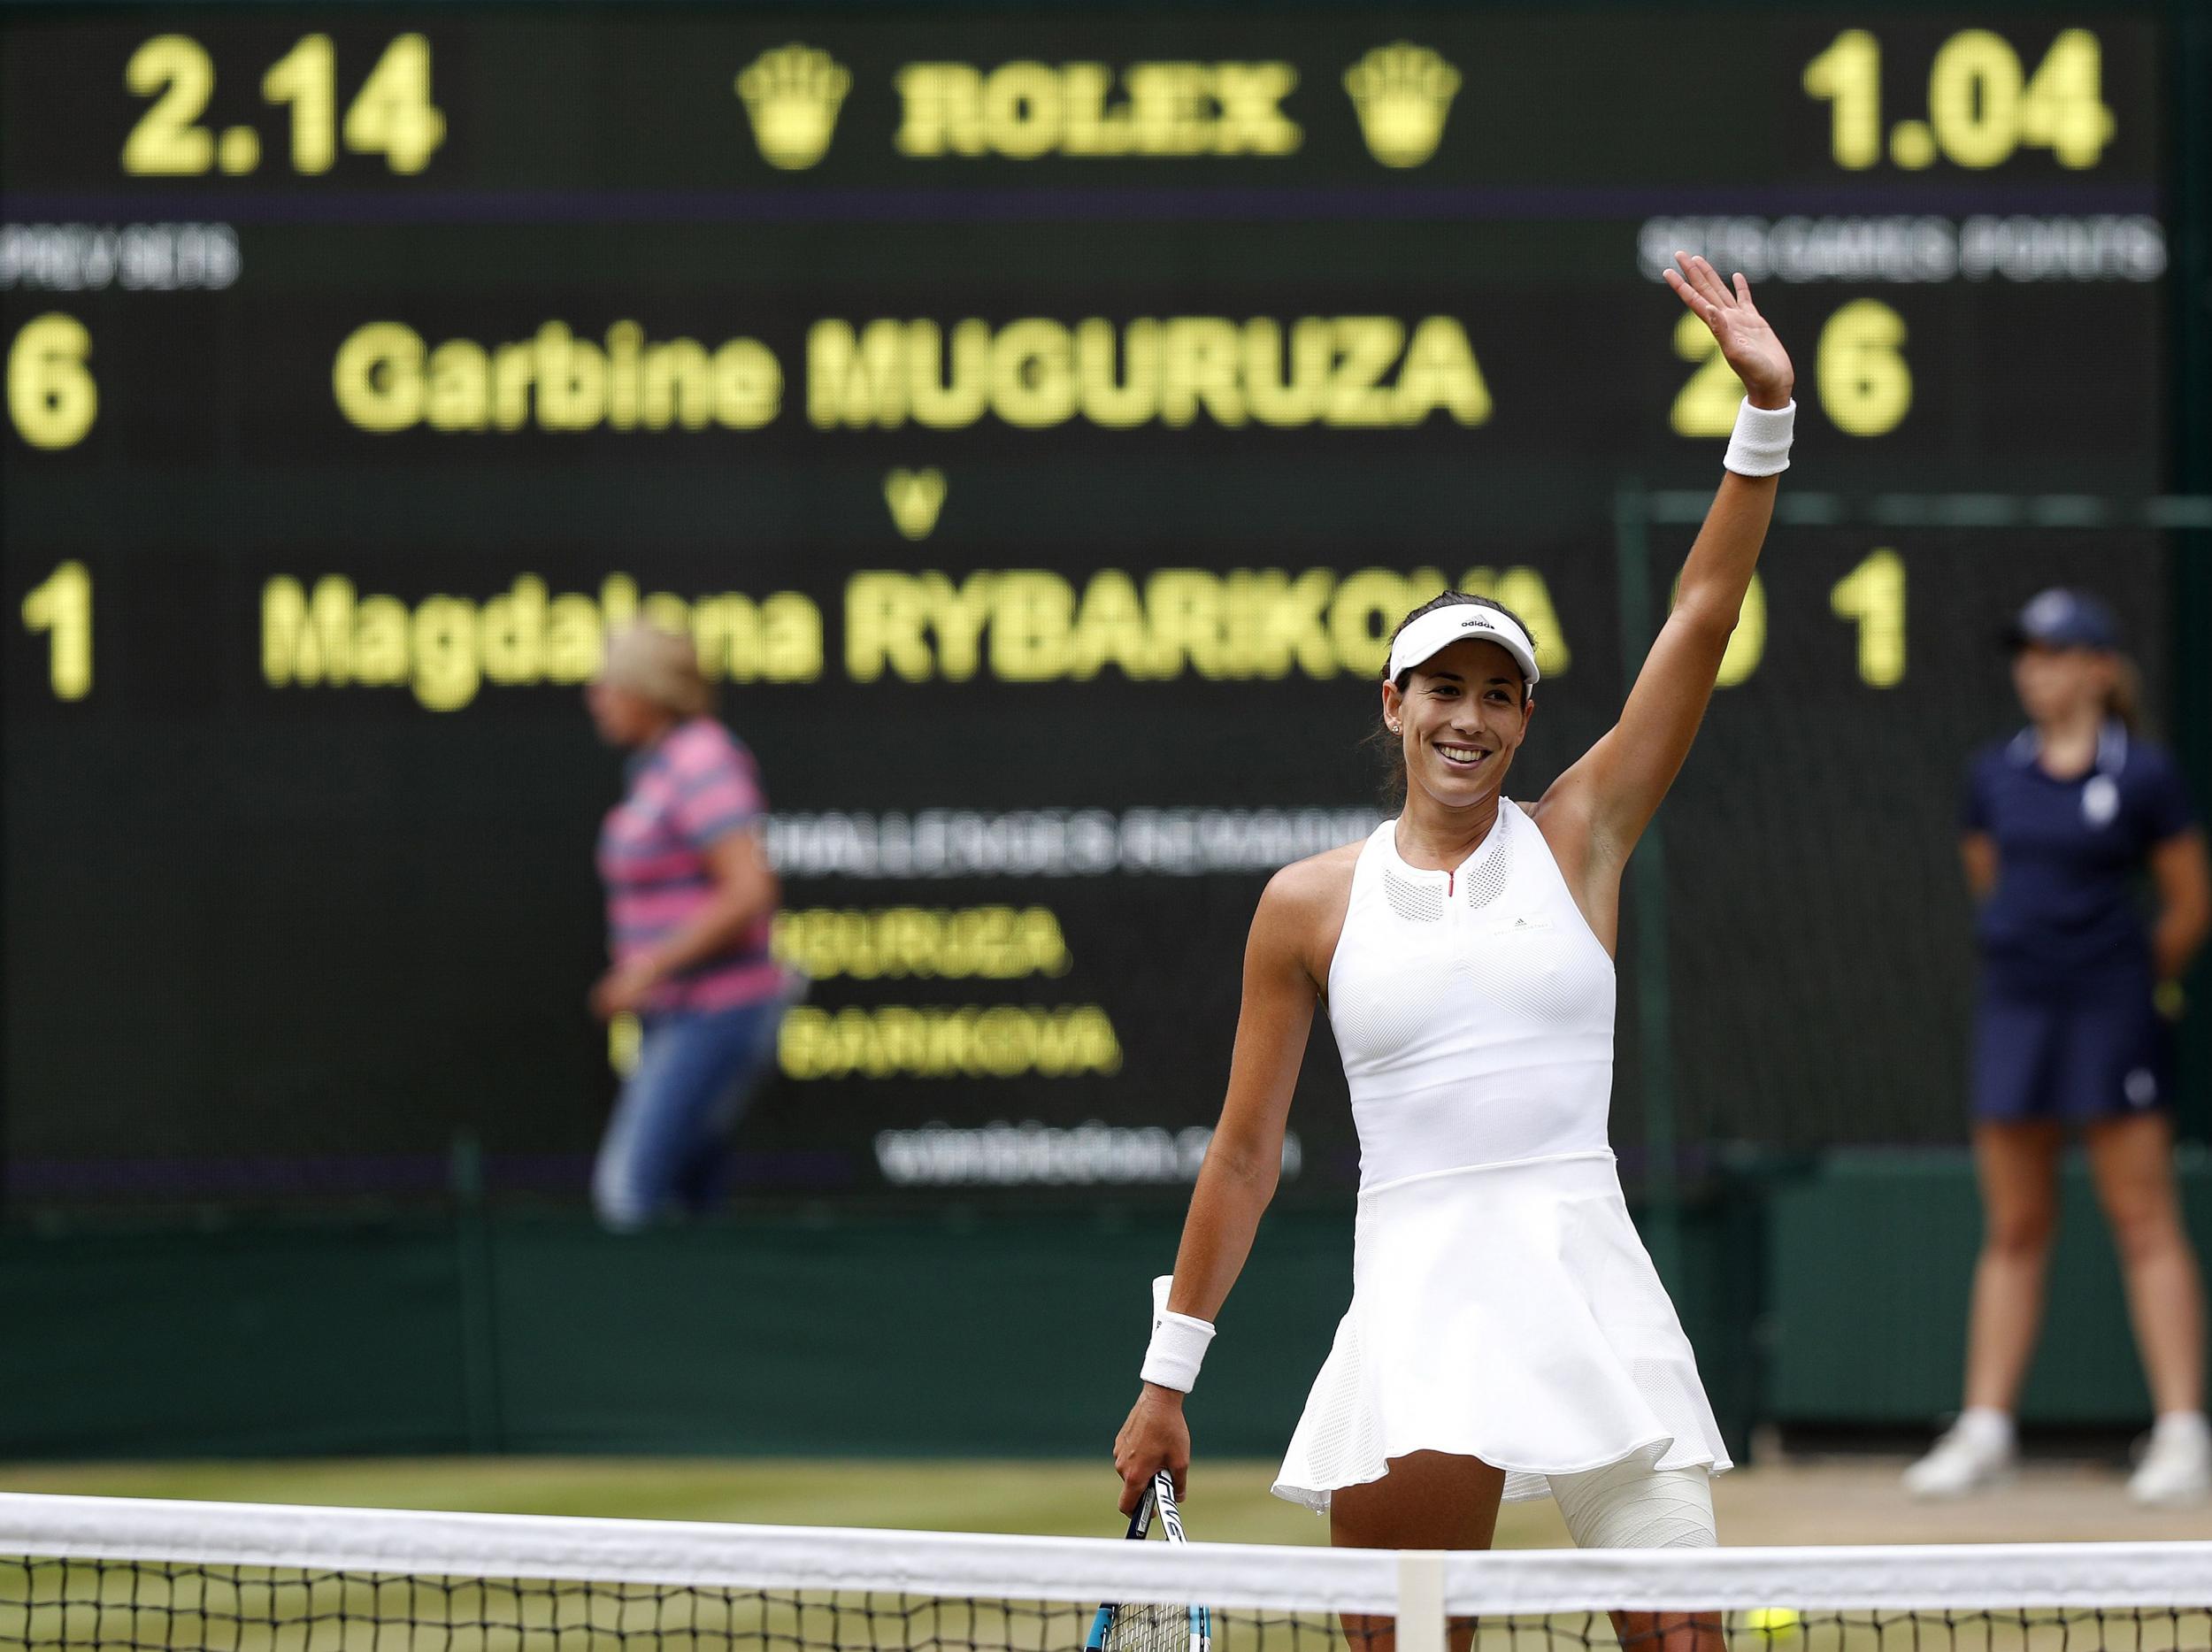 The 23-year-old is hoping to win Wimbledon for the first time